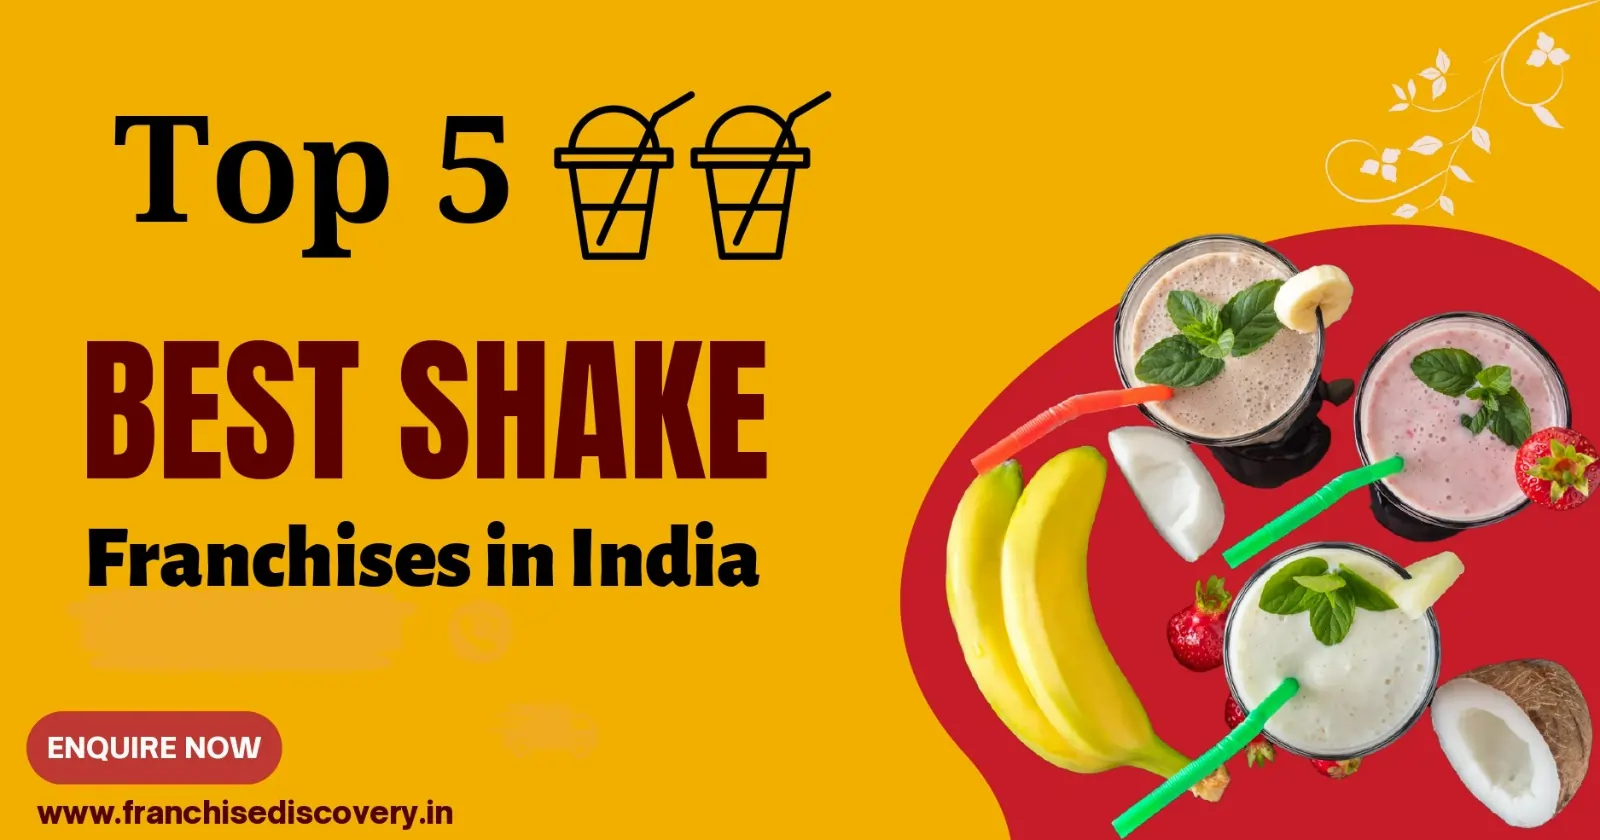  Top 5 best shake franchise opportunity in India- A Delicious Investment